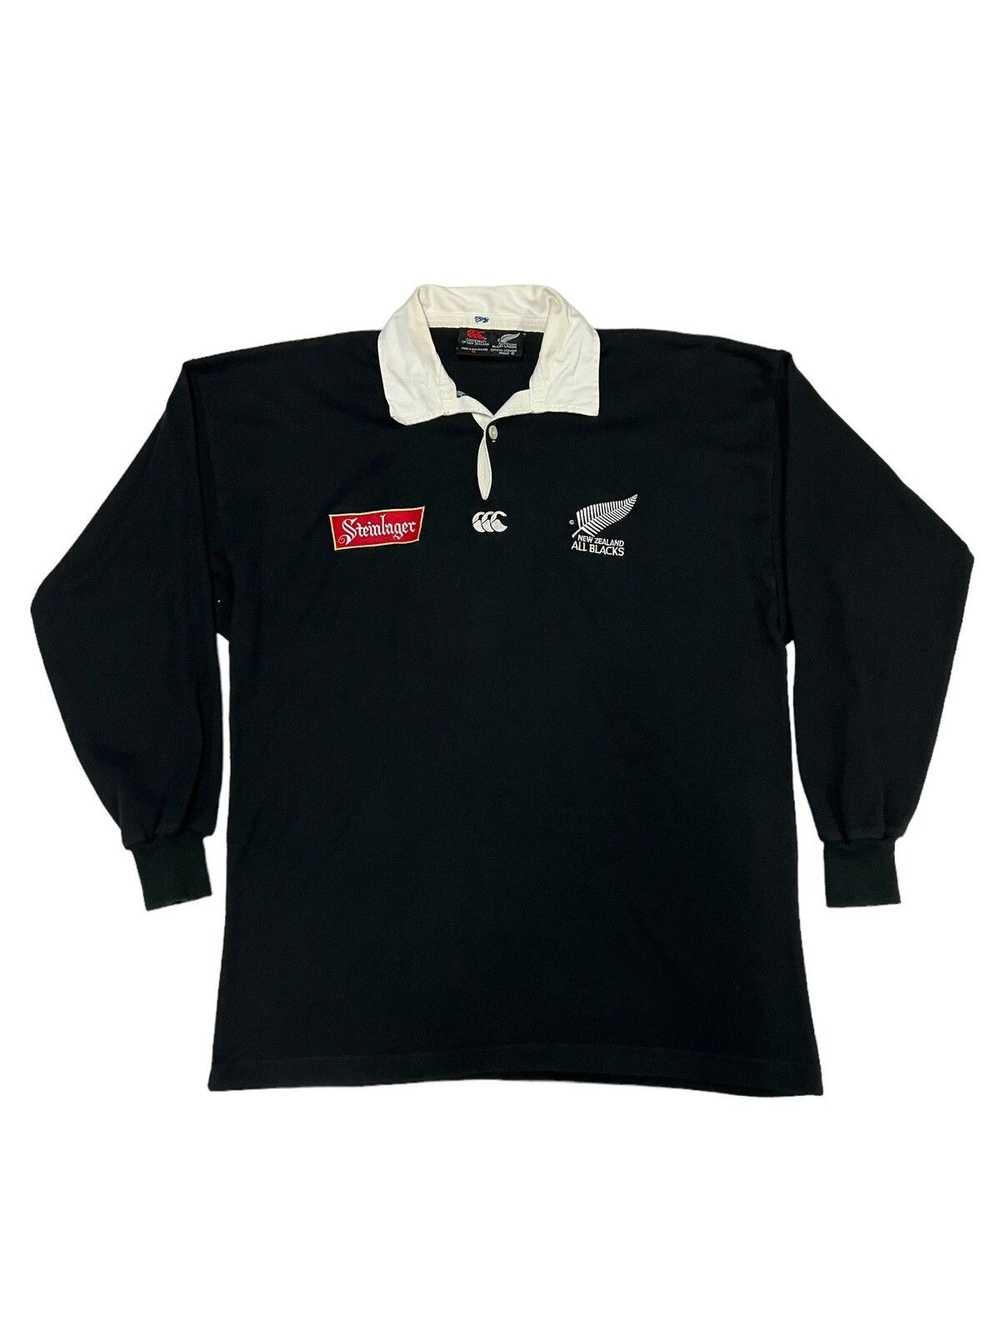 All Black × Canterbury Of New Zealand × Vintage 1… - image 1